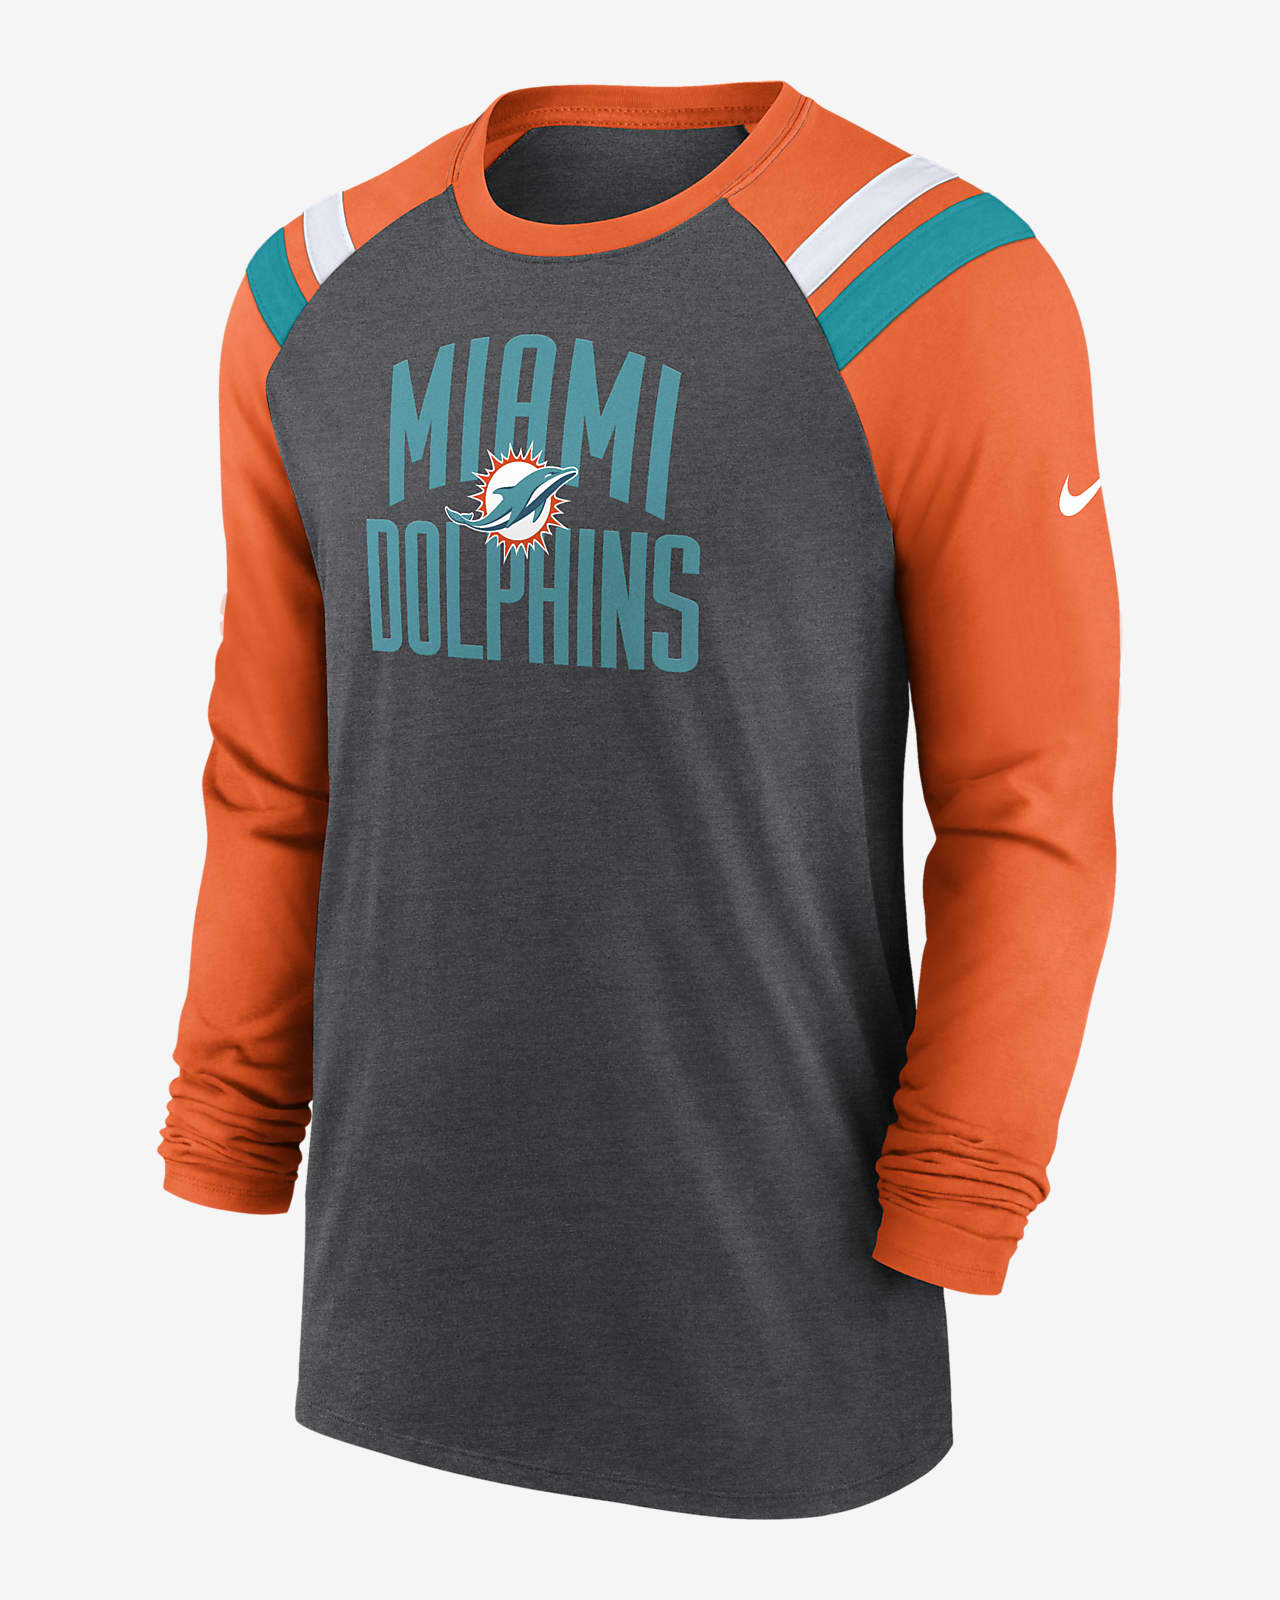 Miami Dolphins Mens T-Shirts, Dolphins T-Shirts